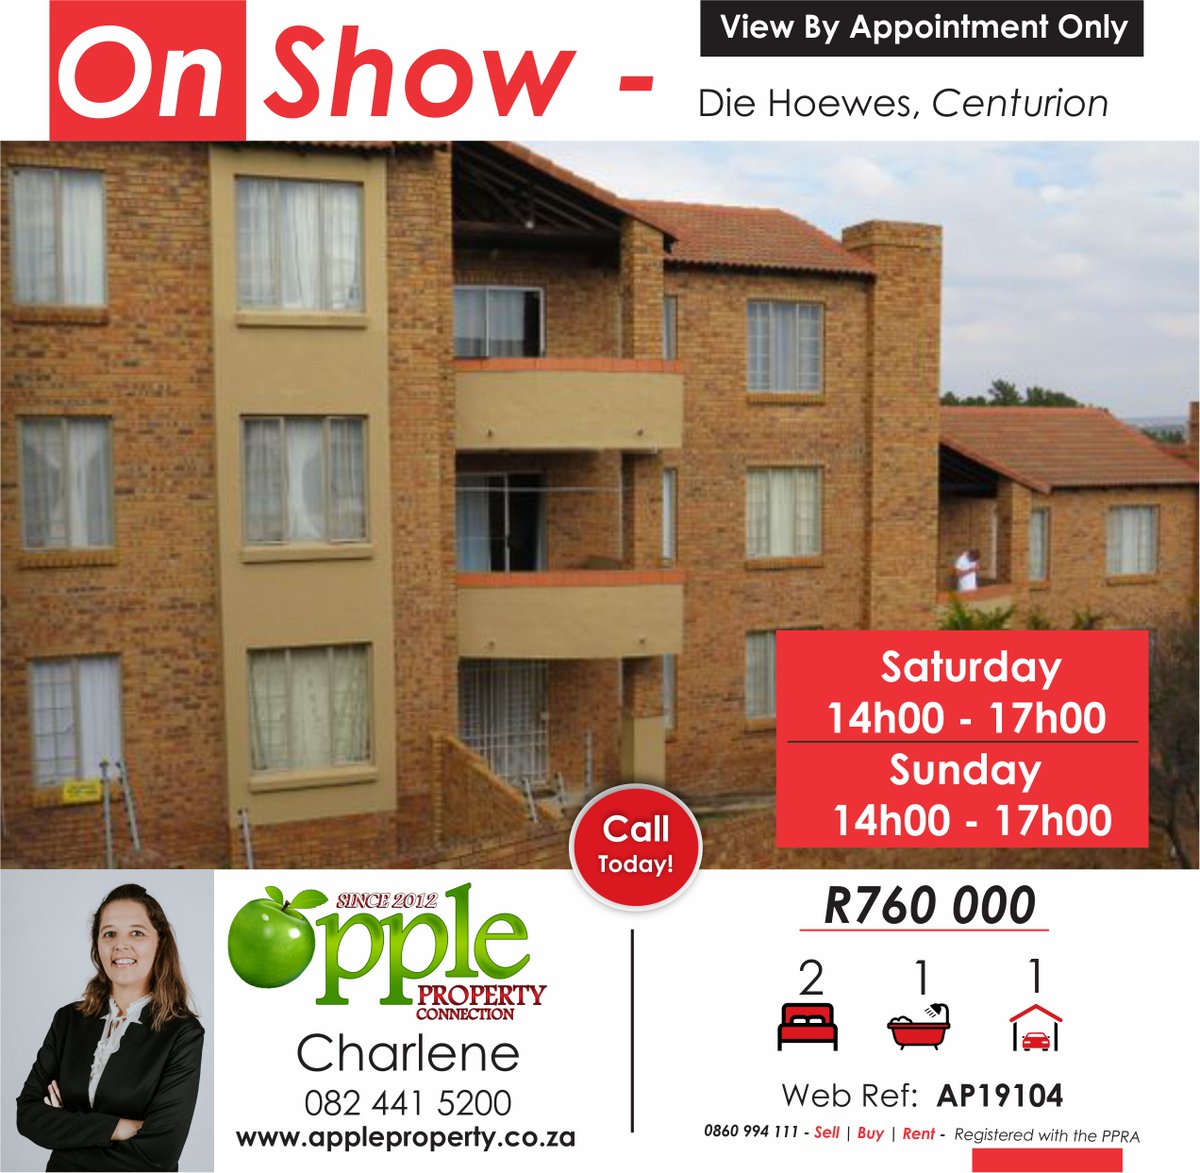 😎CHECK IT OUT!
🎉ONSHOW
#forsale
#centurion #nationwide #ApplePropertyConnection
0860 994 111 | appleproperty.co.za